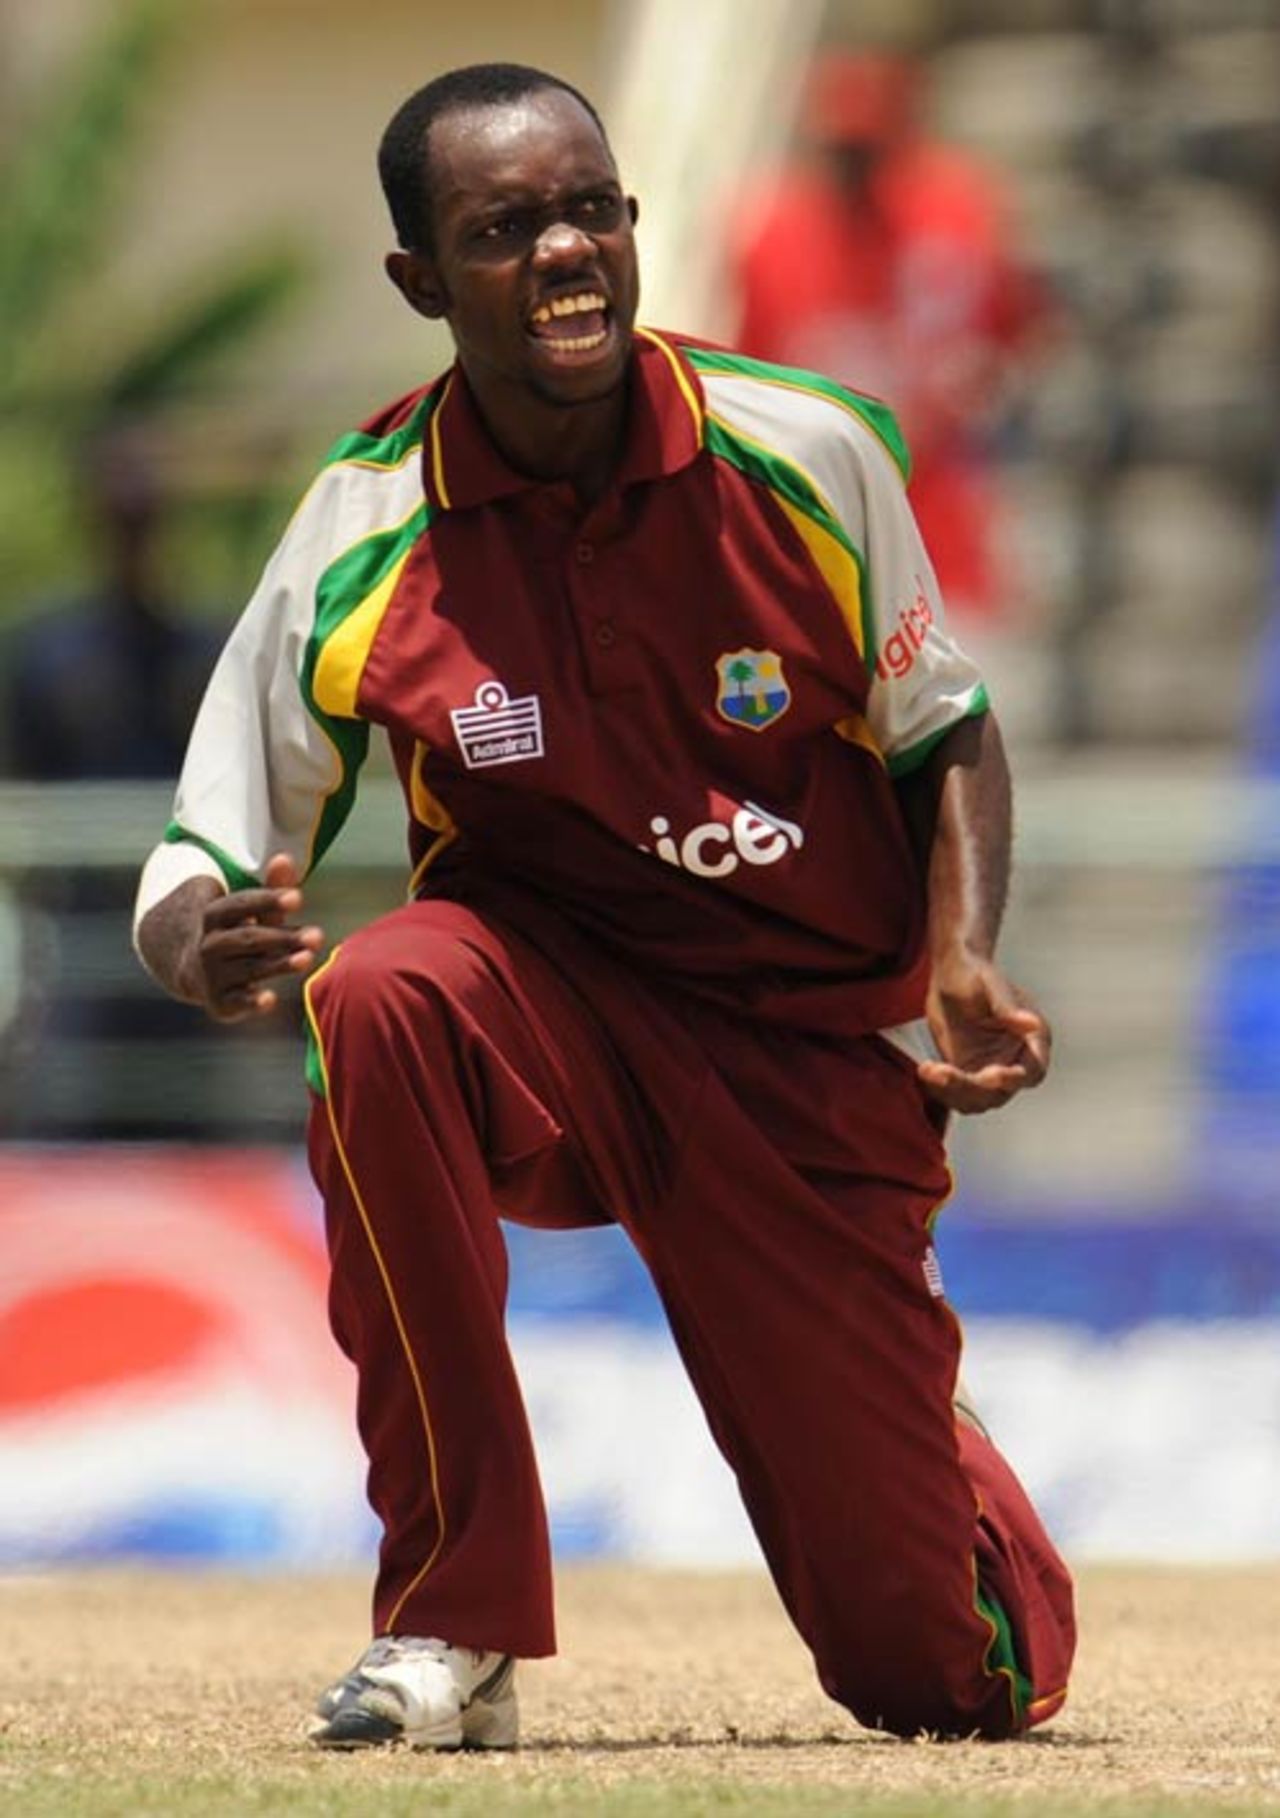 Nikita Miller celebrates his first one-day international wicket, West Indies v Australia, 4th ODI, St Kitts, July 4, 2008